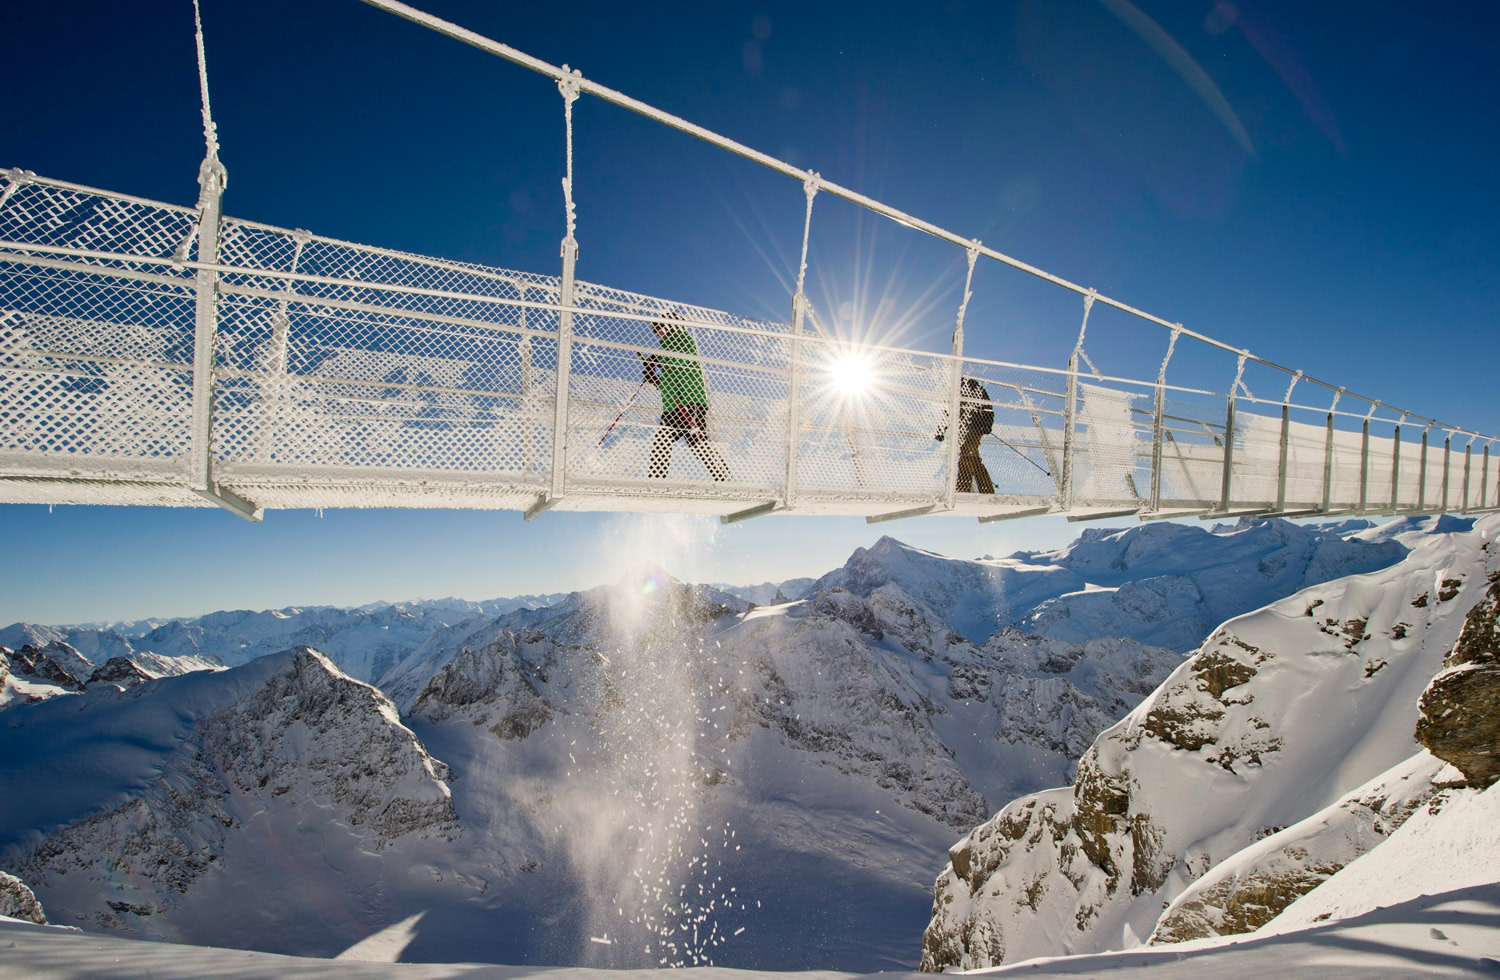 Icy rope bridge offers chilling views of the Alps